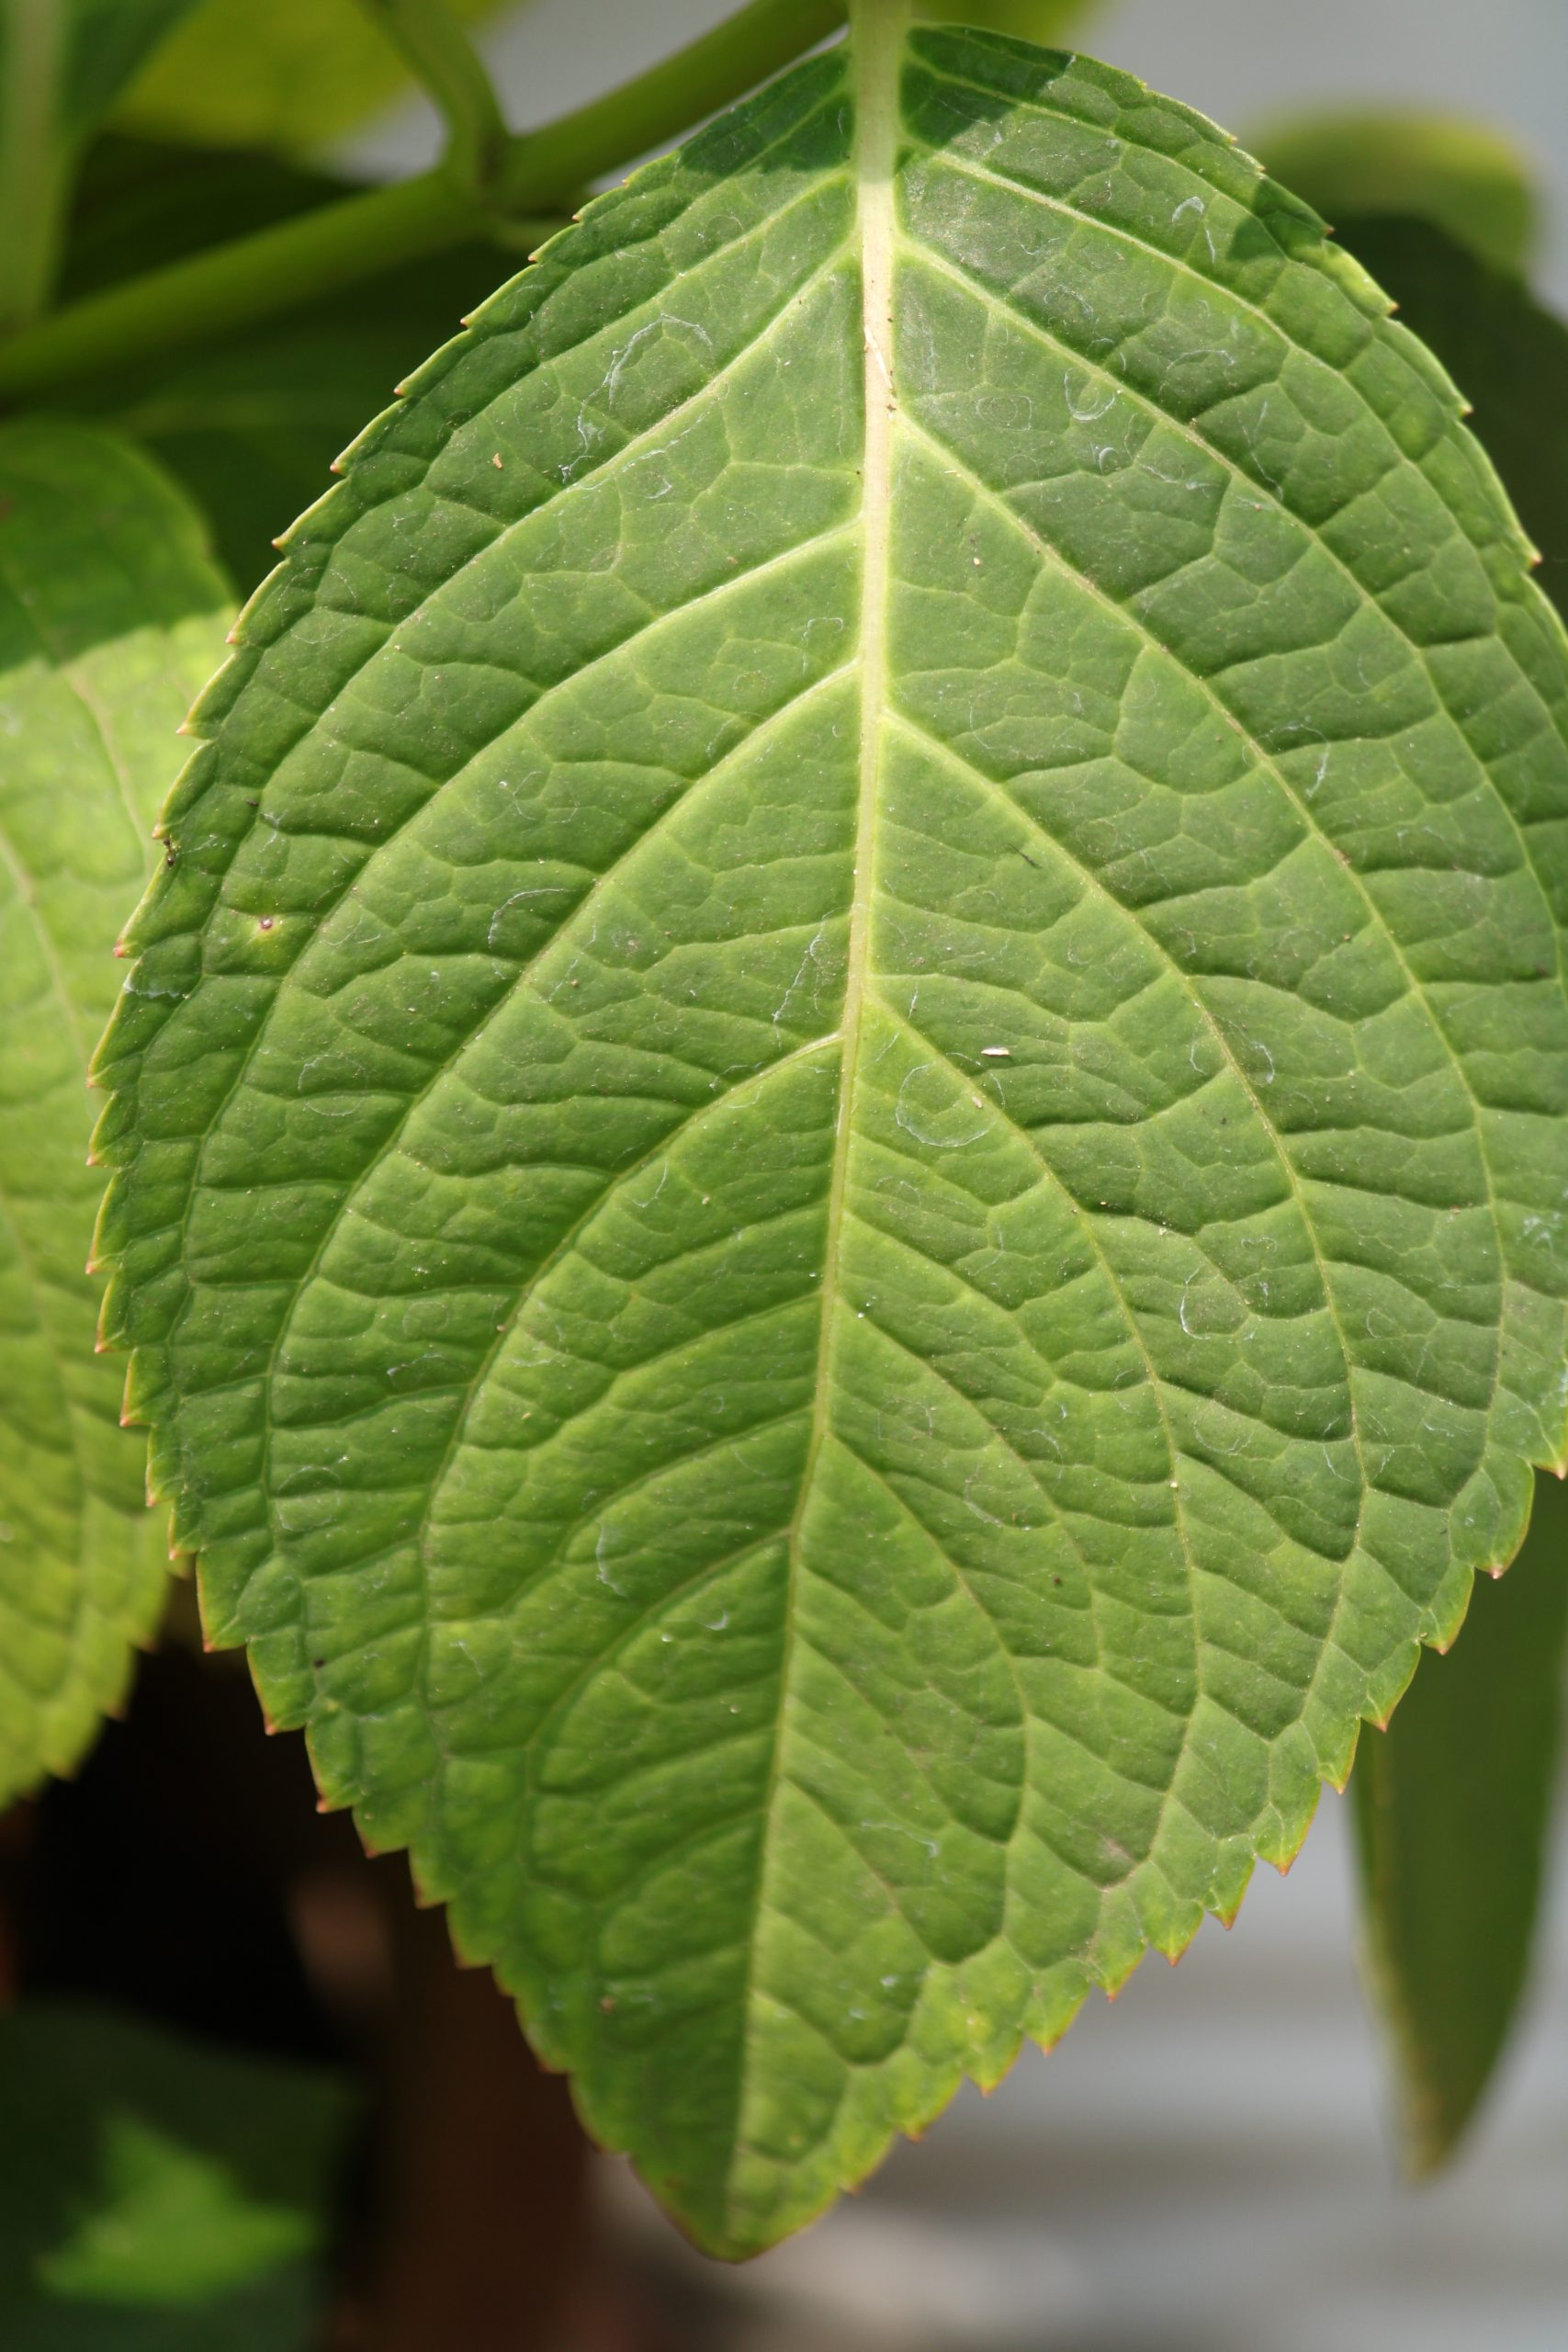 Texture of a plant leaf